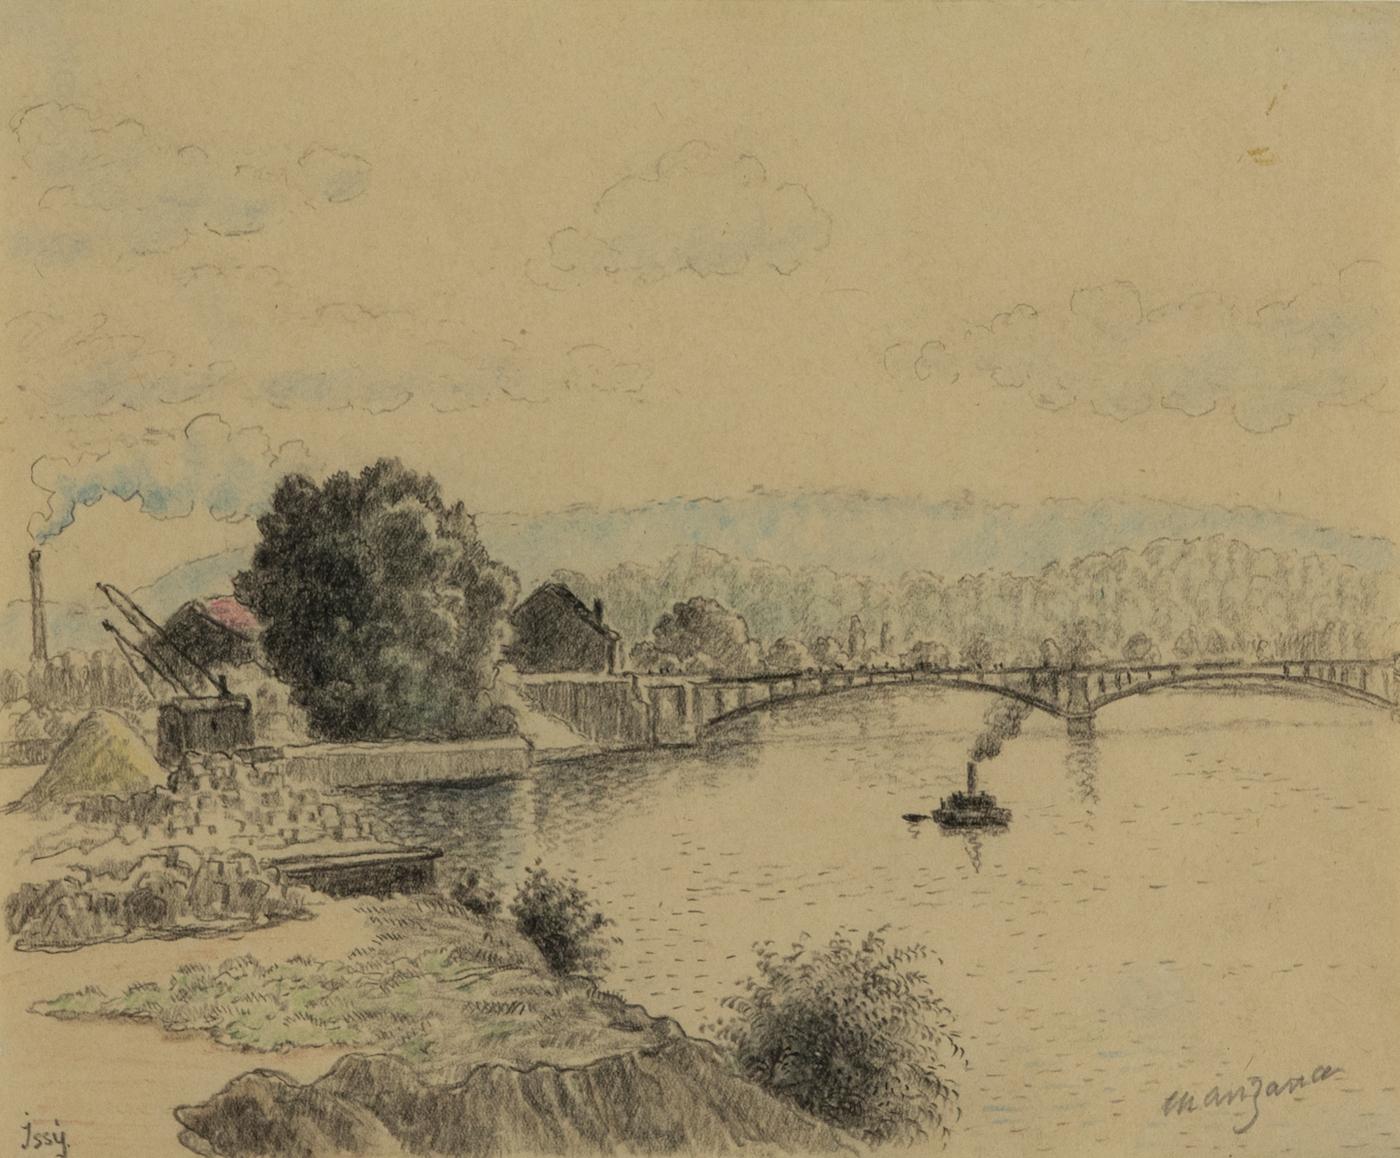 Issy, France by Georges Manzana Pissarro (1871 - 1961)
Charcoal and coloured crayon on paper
20.4 x 25 cm (8 x 9 ⅞ inches) 
Signed lower right Manzana and inscribed lower left Issy
Executed circa 1890   

This work is accompanied by a certificate of